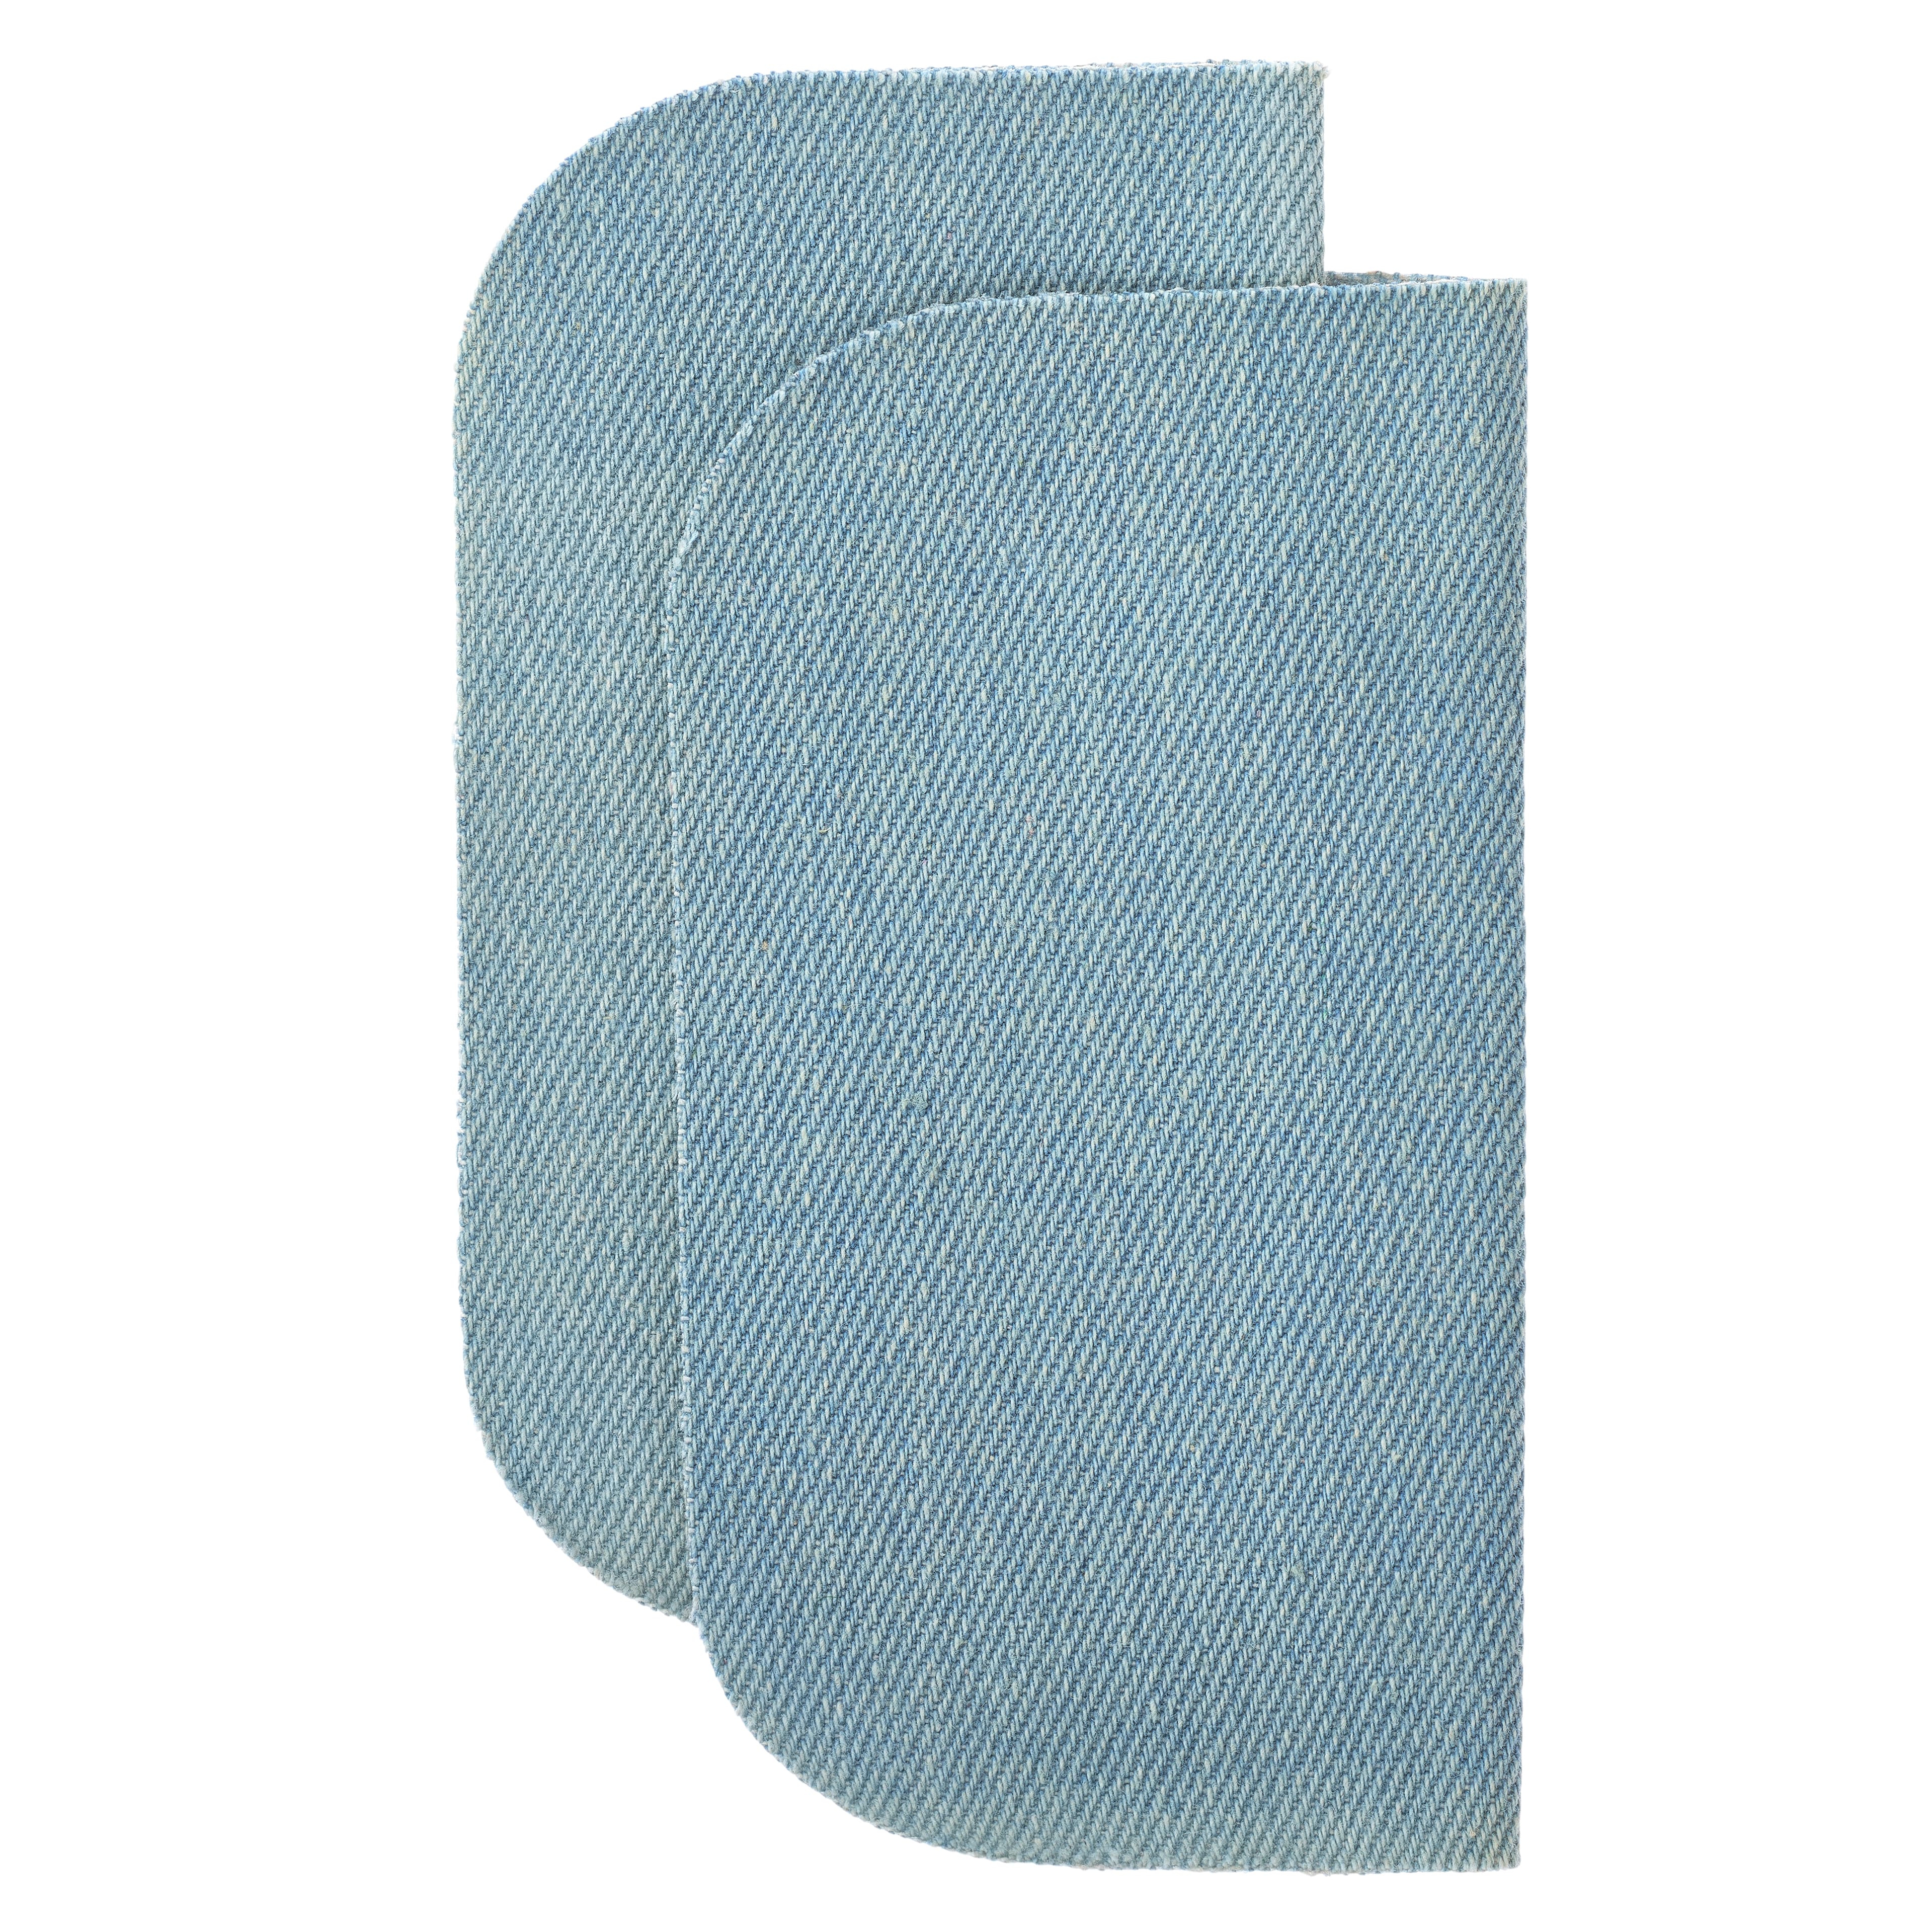 Loops & Threads Denim Patches, Stonewashed | 5 x 5 | Michaels